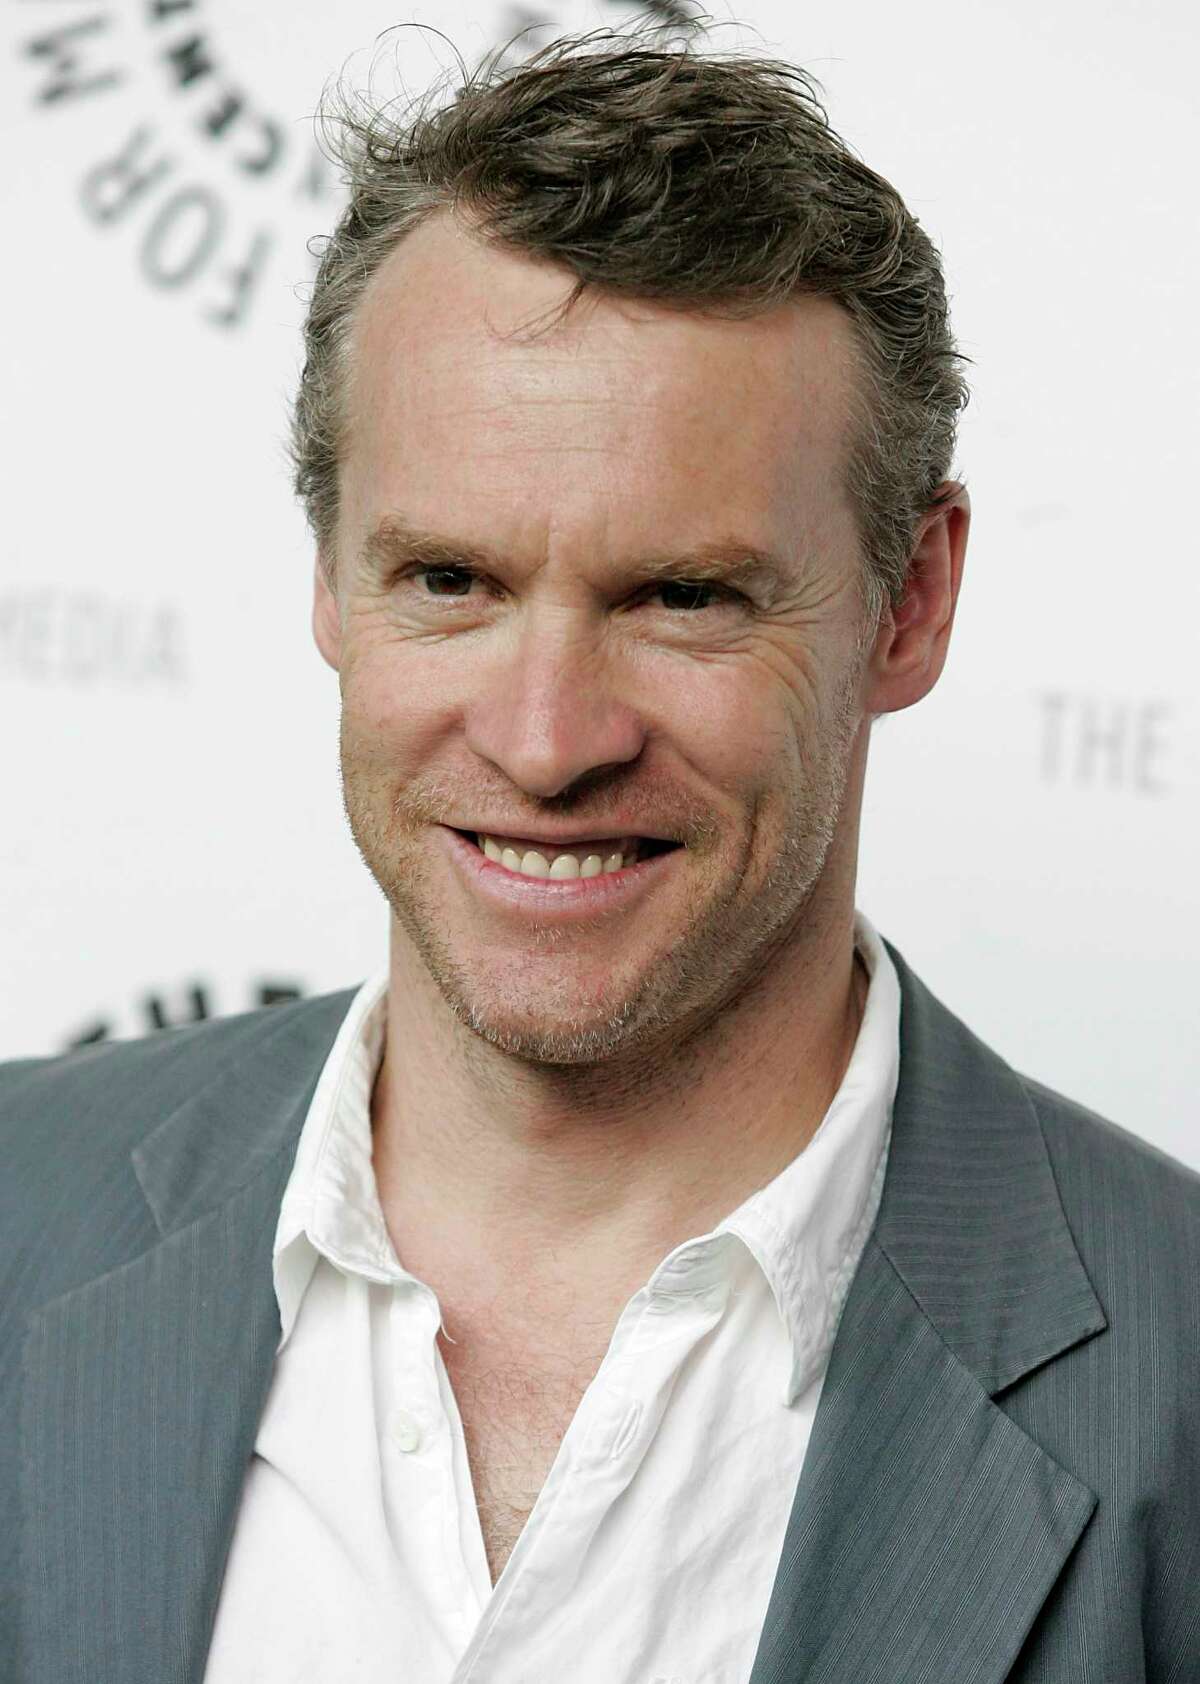 Actor Tate Donovan donated nearly $3,000 to Democrat Beto O'Rourke's campaign for the U.S. Senate.